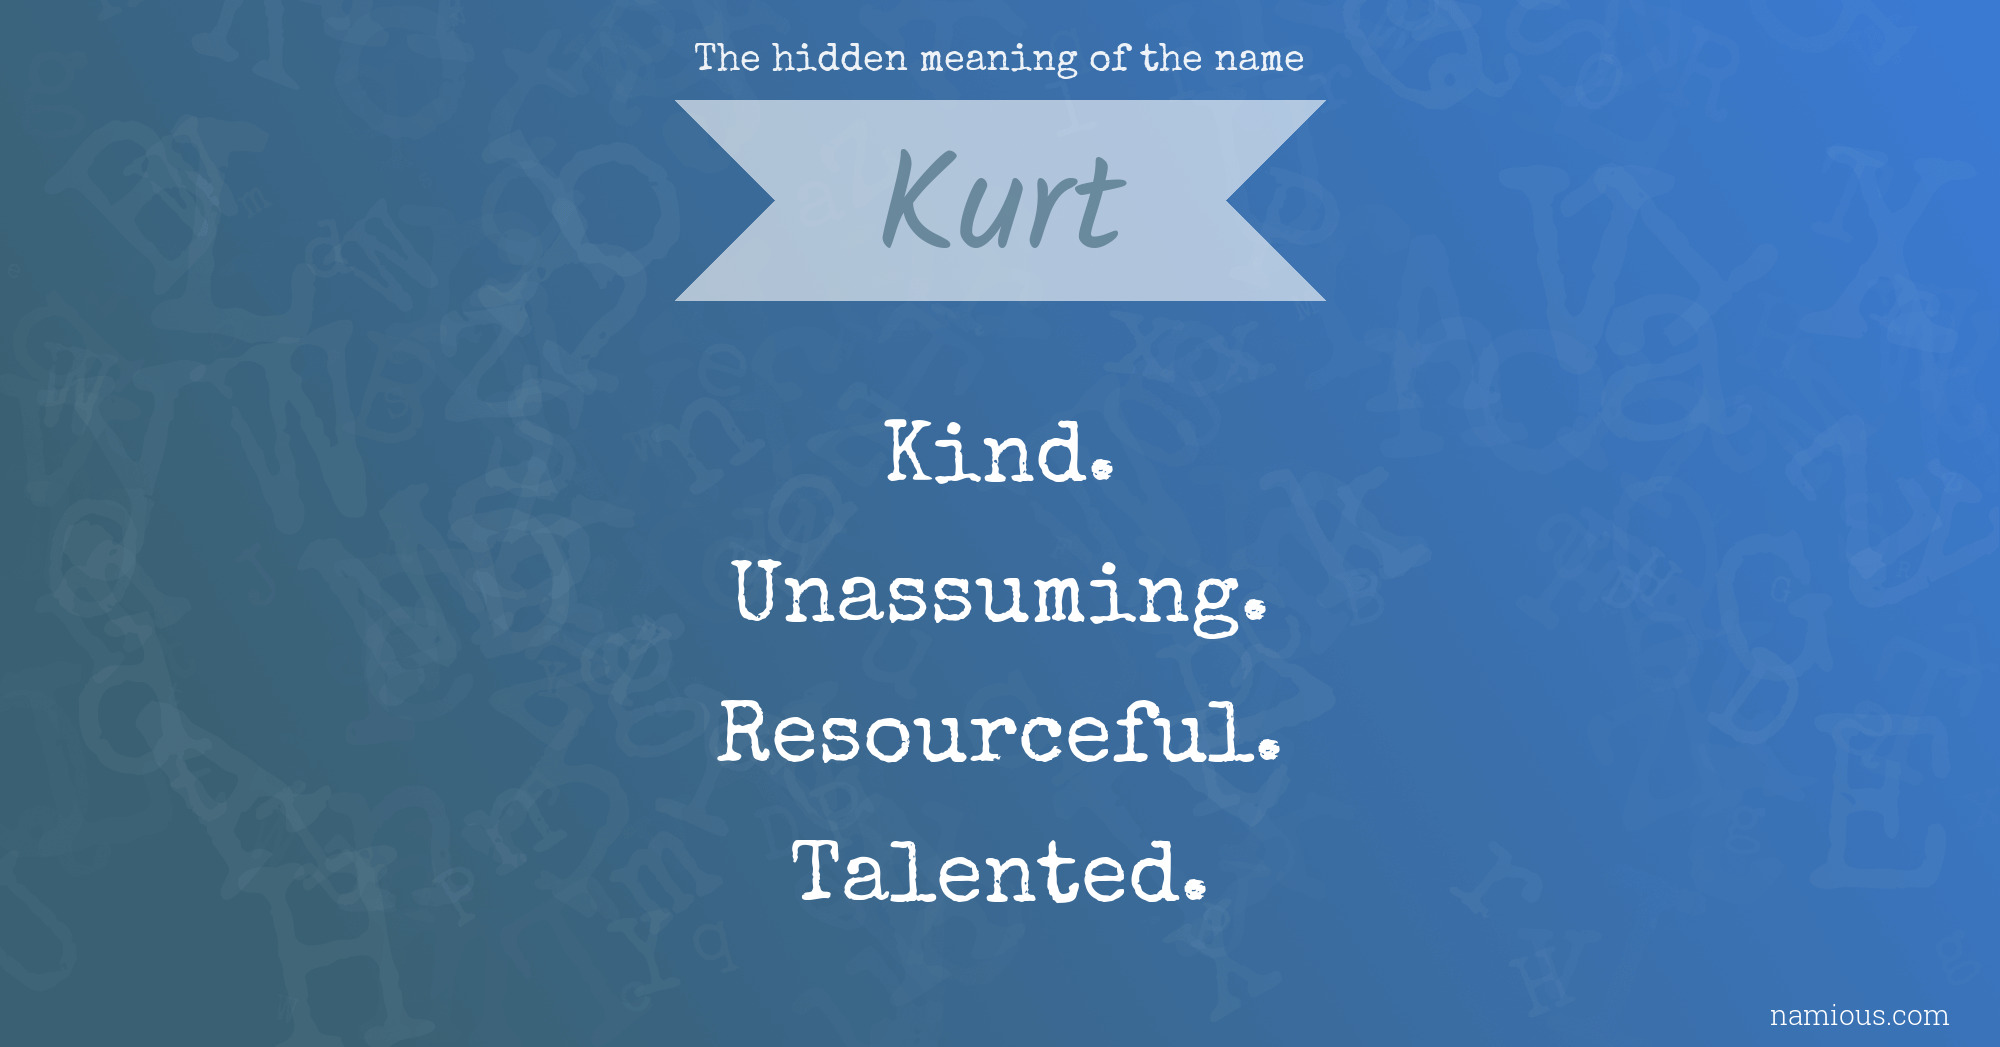 The hidden meaning of the name Kurt